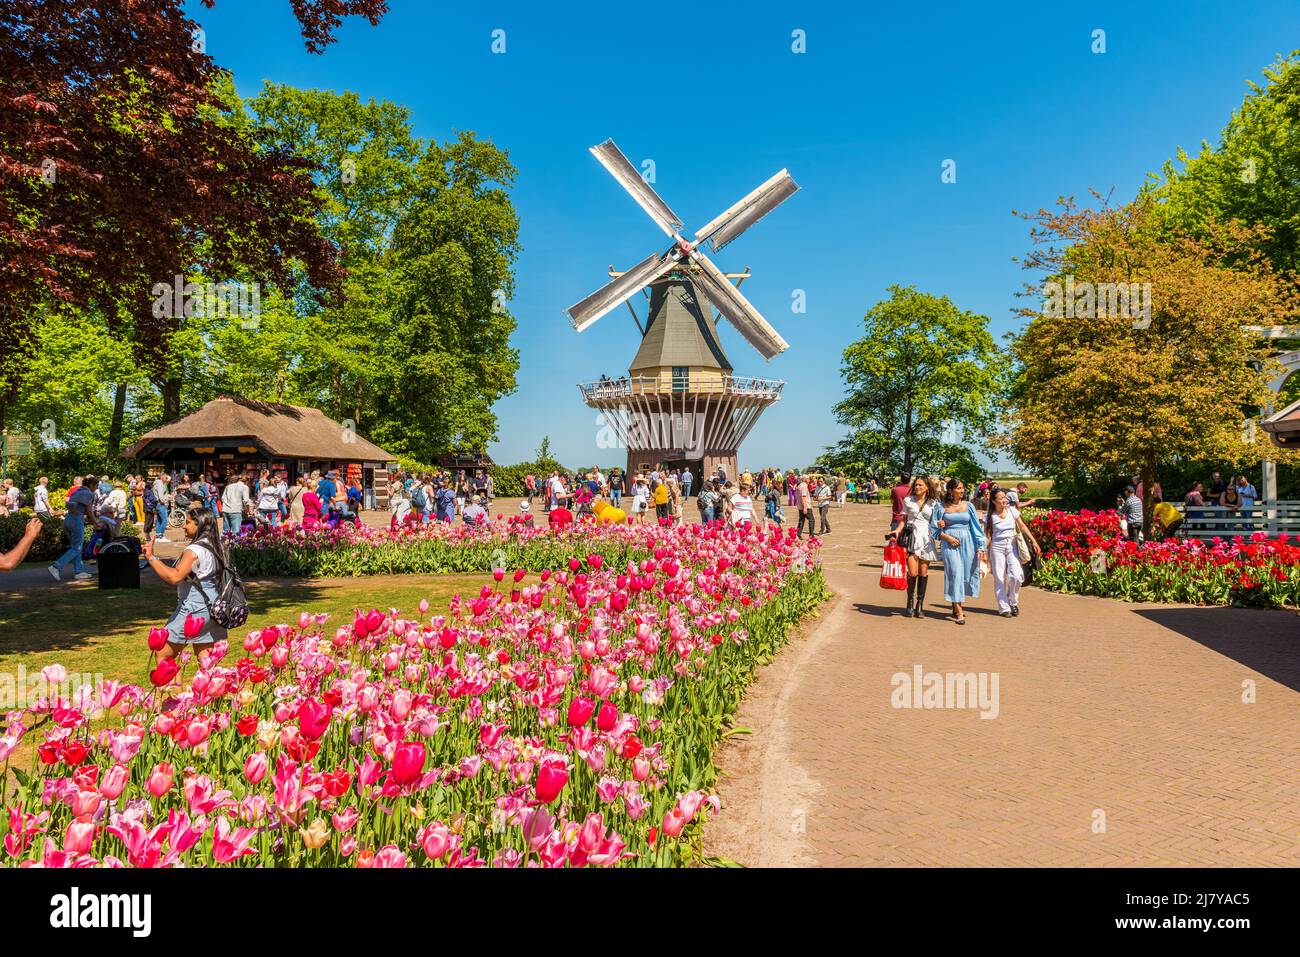 Windmill at the Keukenhof Gardens complex in Lisse, South Holland, The Netherlands. Keukenhof is one of the world's largest flower gardens. Stock Photo